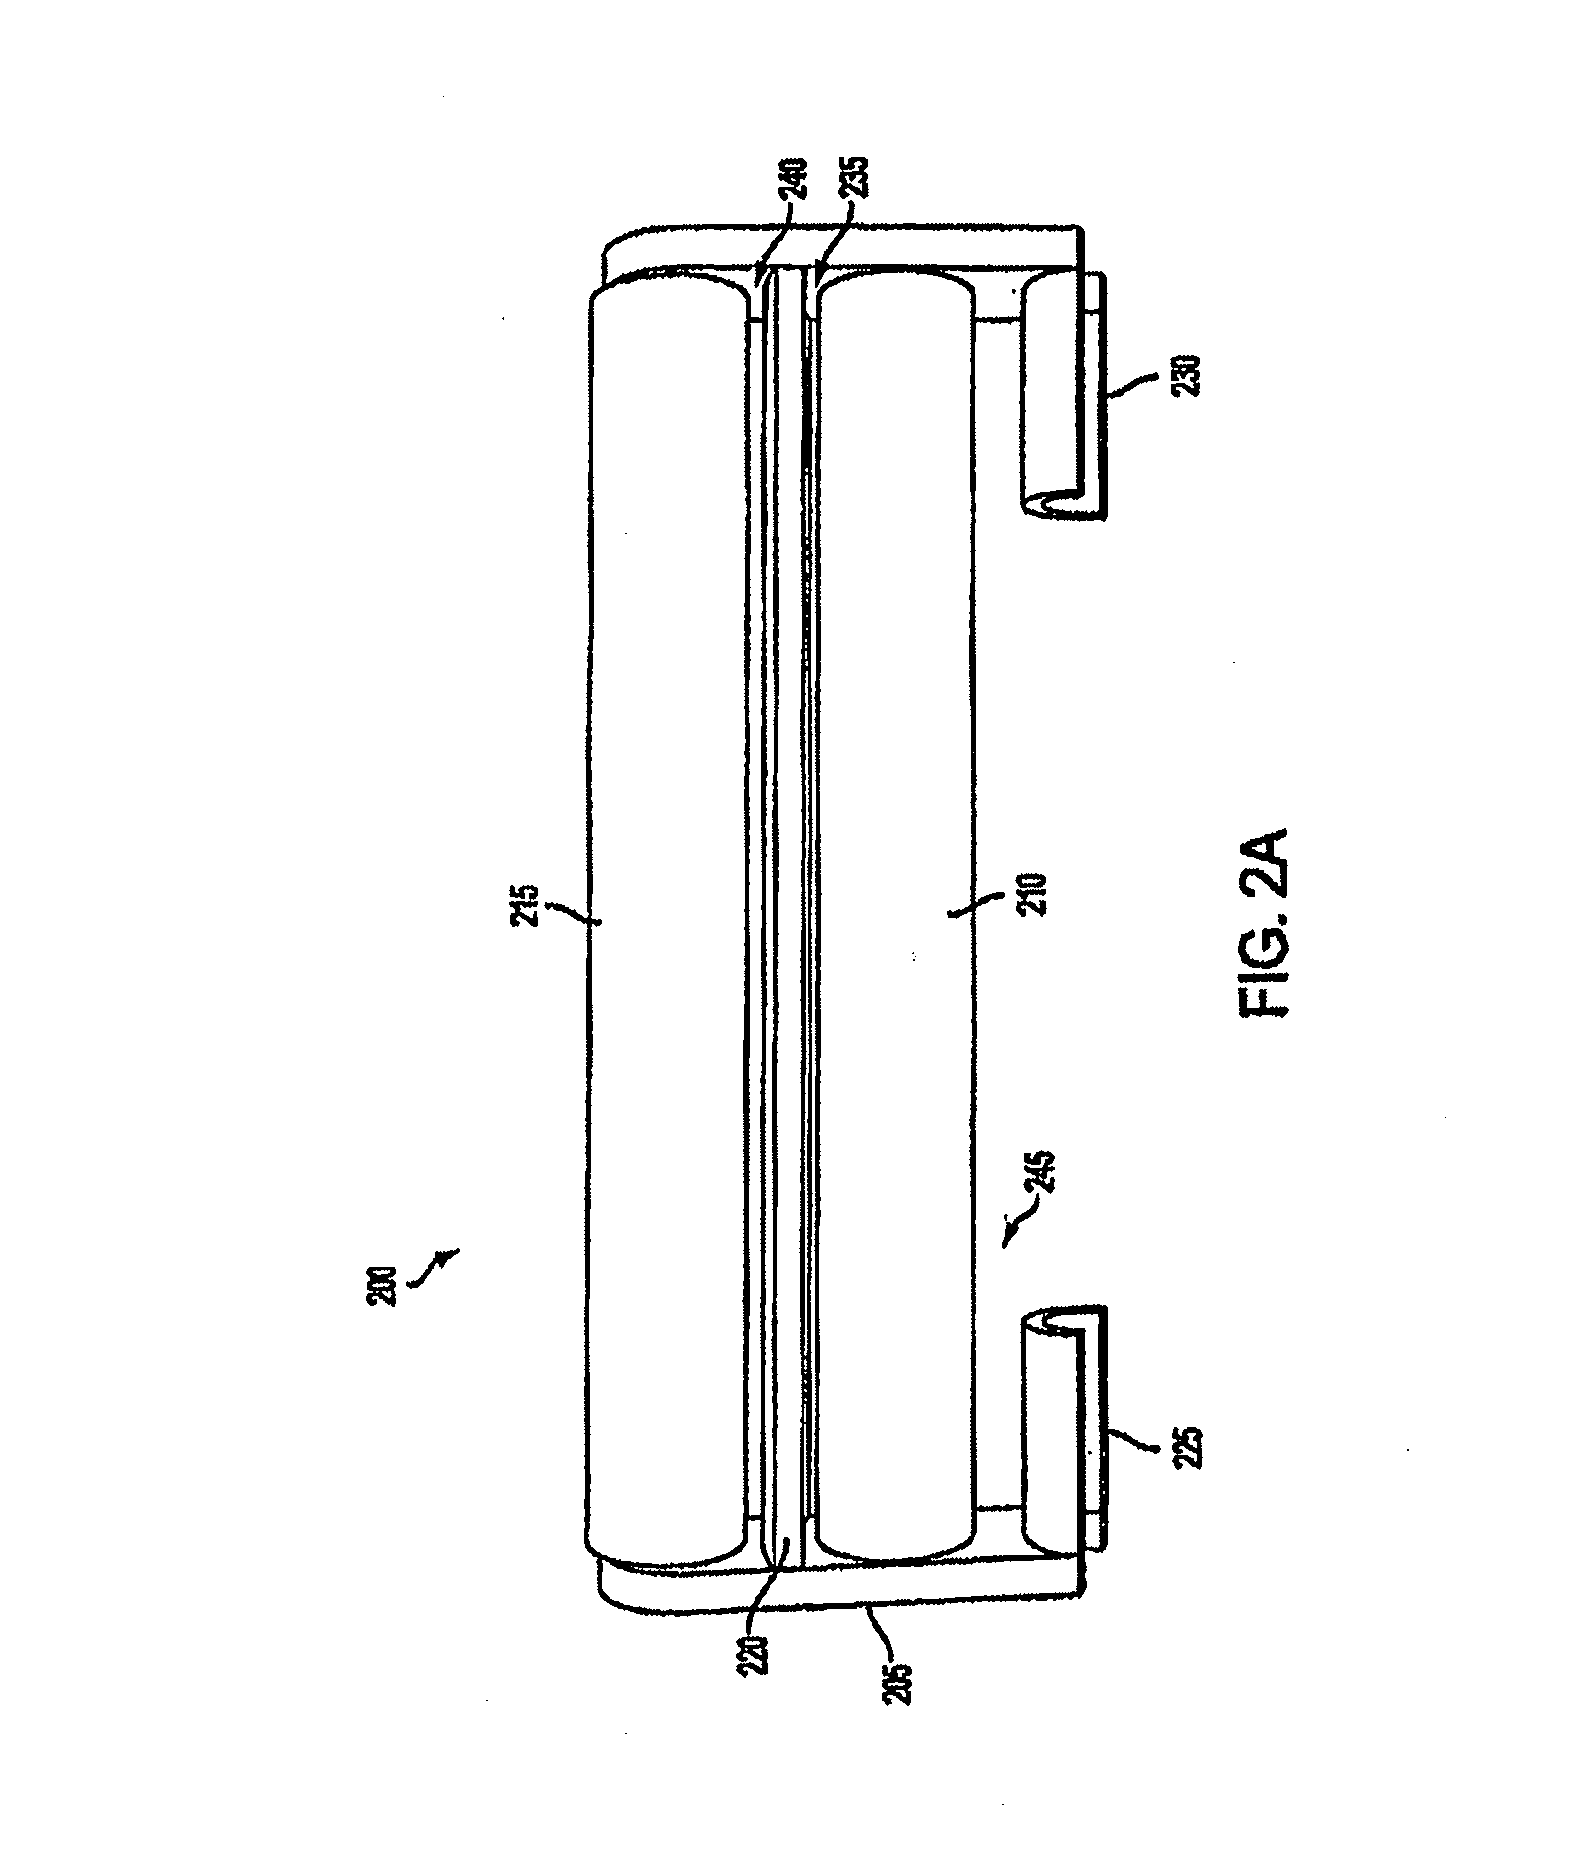 Protective material applicator device